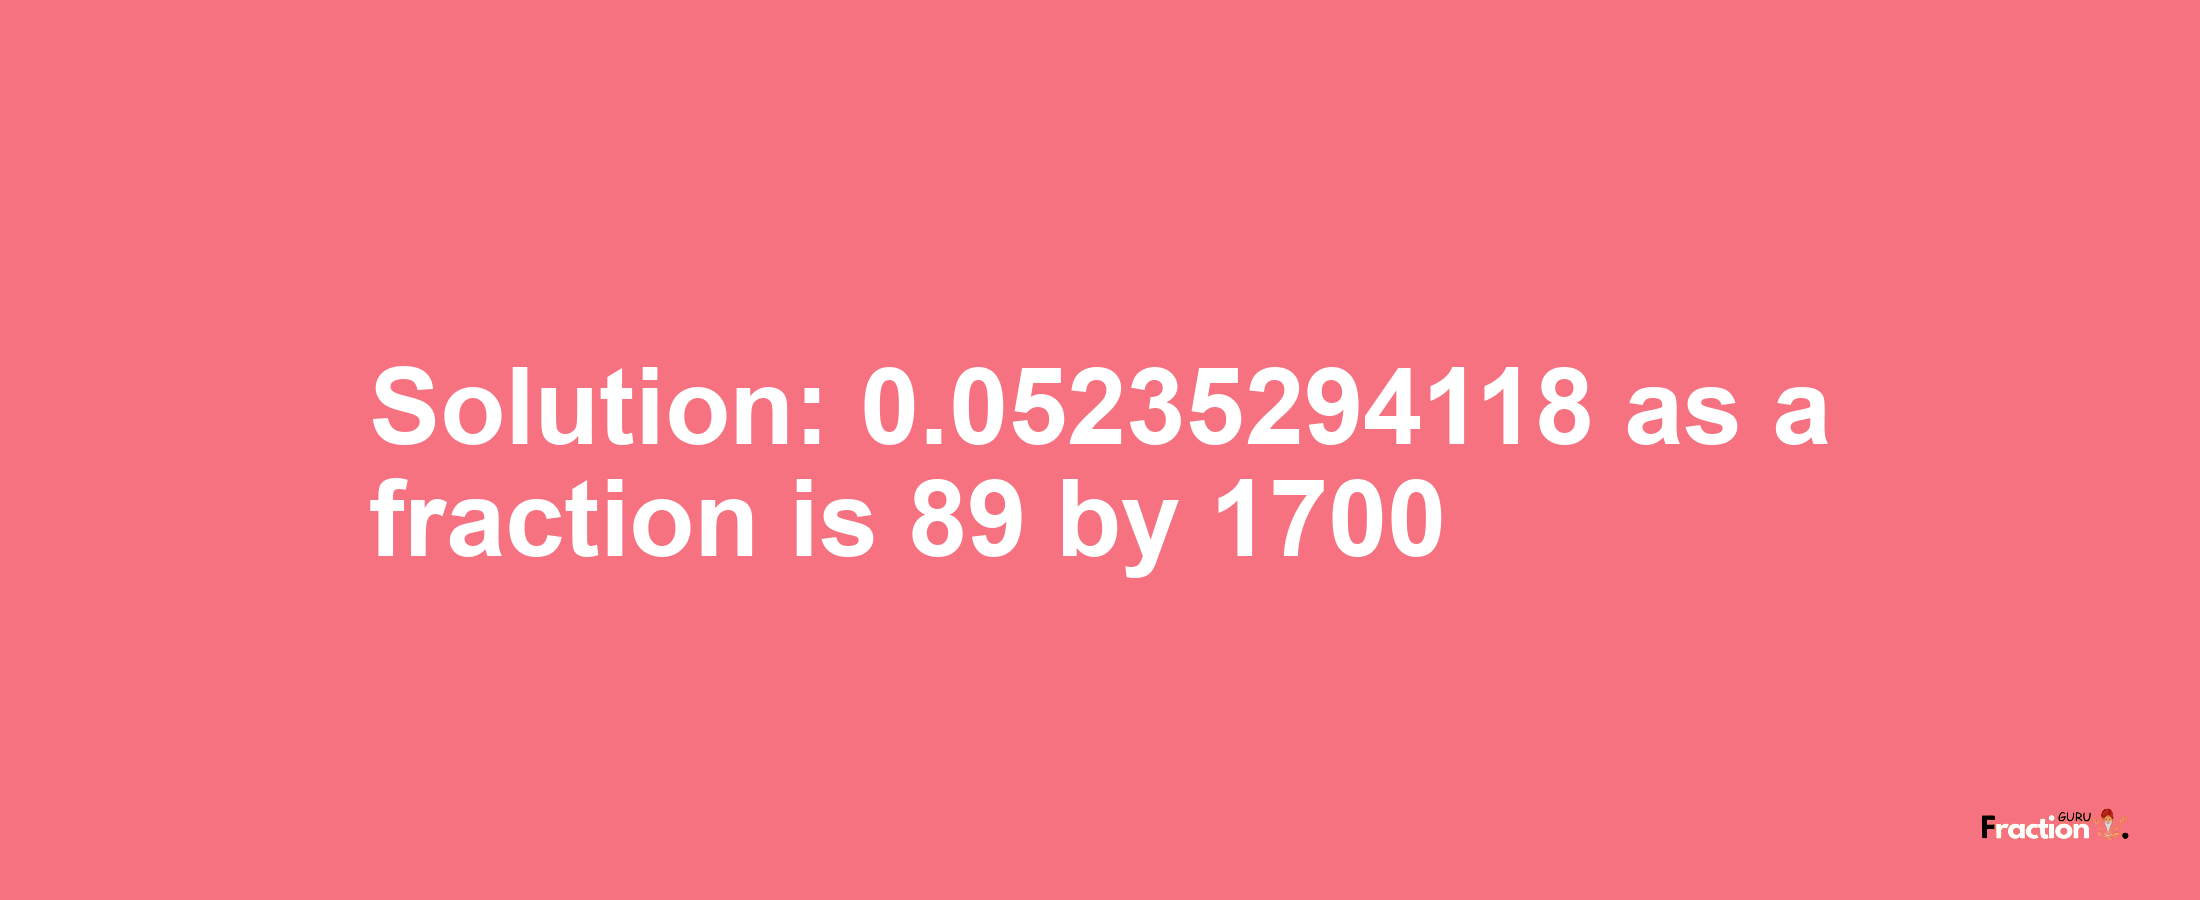 Solution:0.05235294118 as a fraction is 89/1700